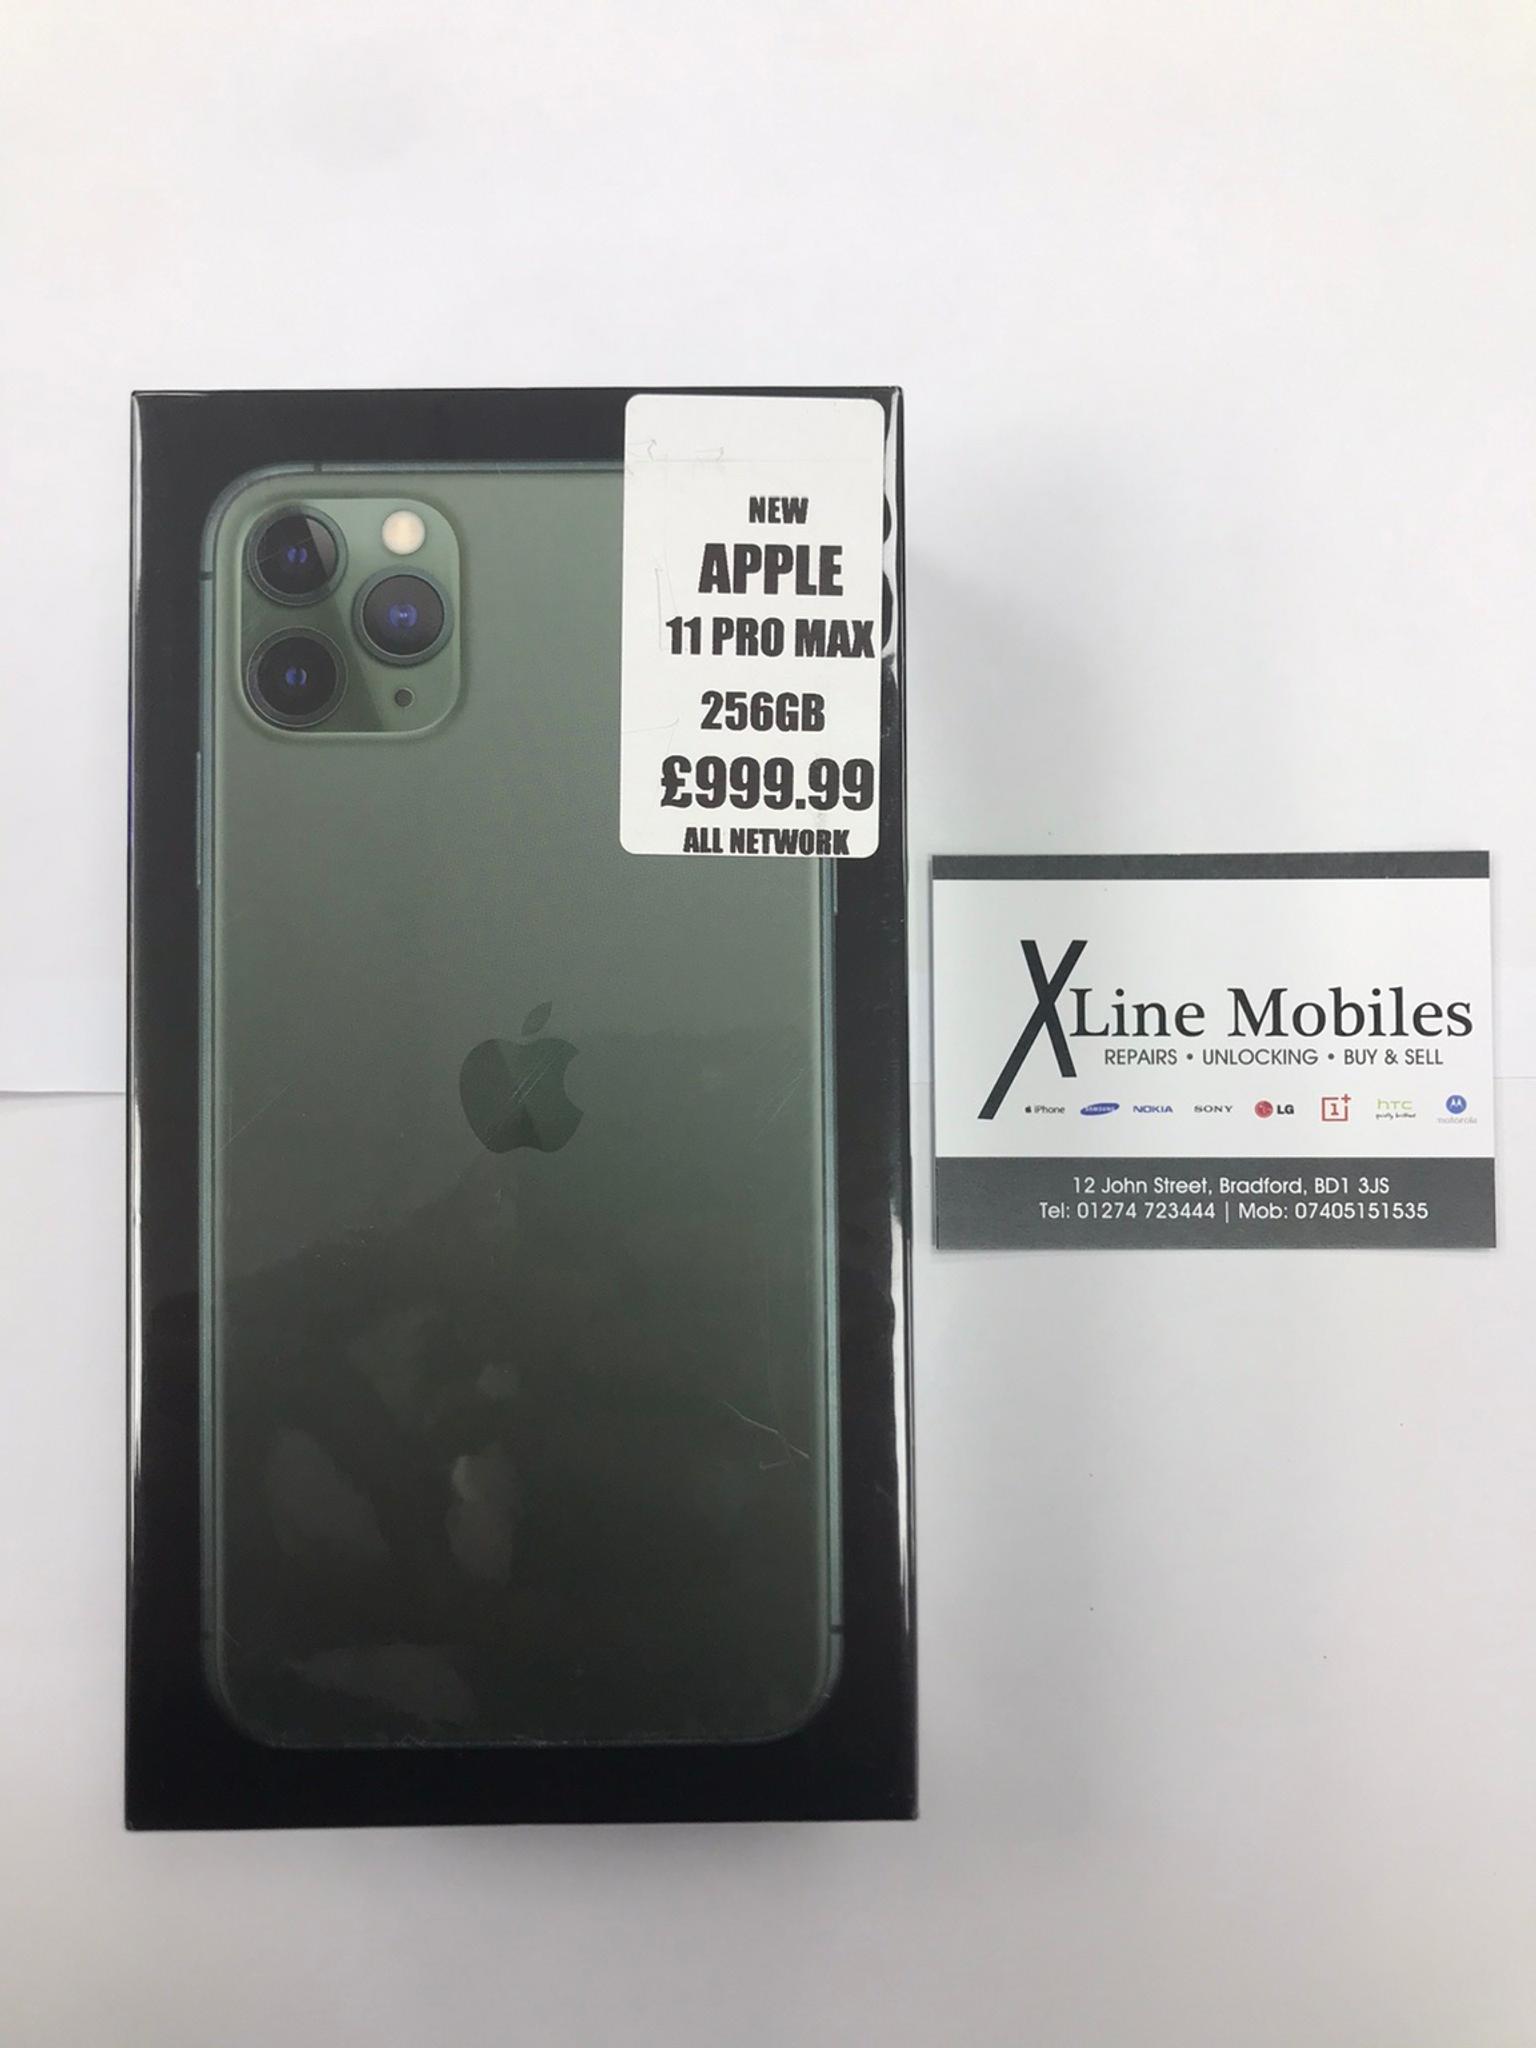 Brand New Apple Iphone 11 Pro Max 256gb In 2 Bradford For 990 00 For Sale Shpock